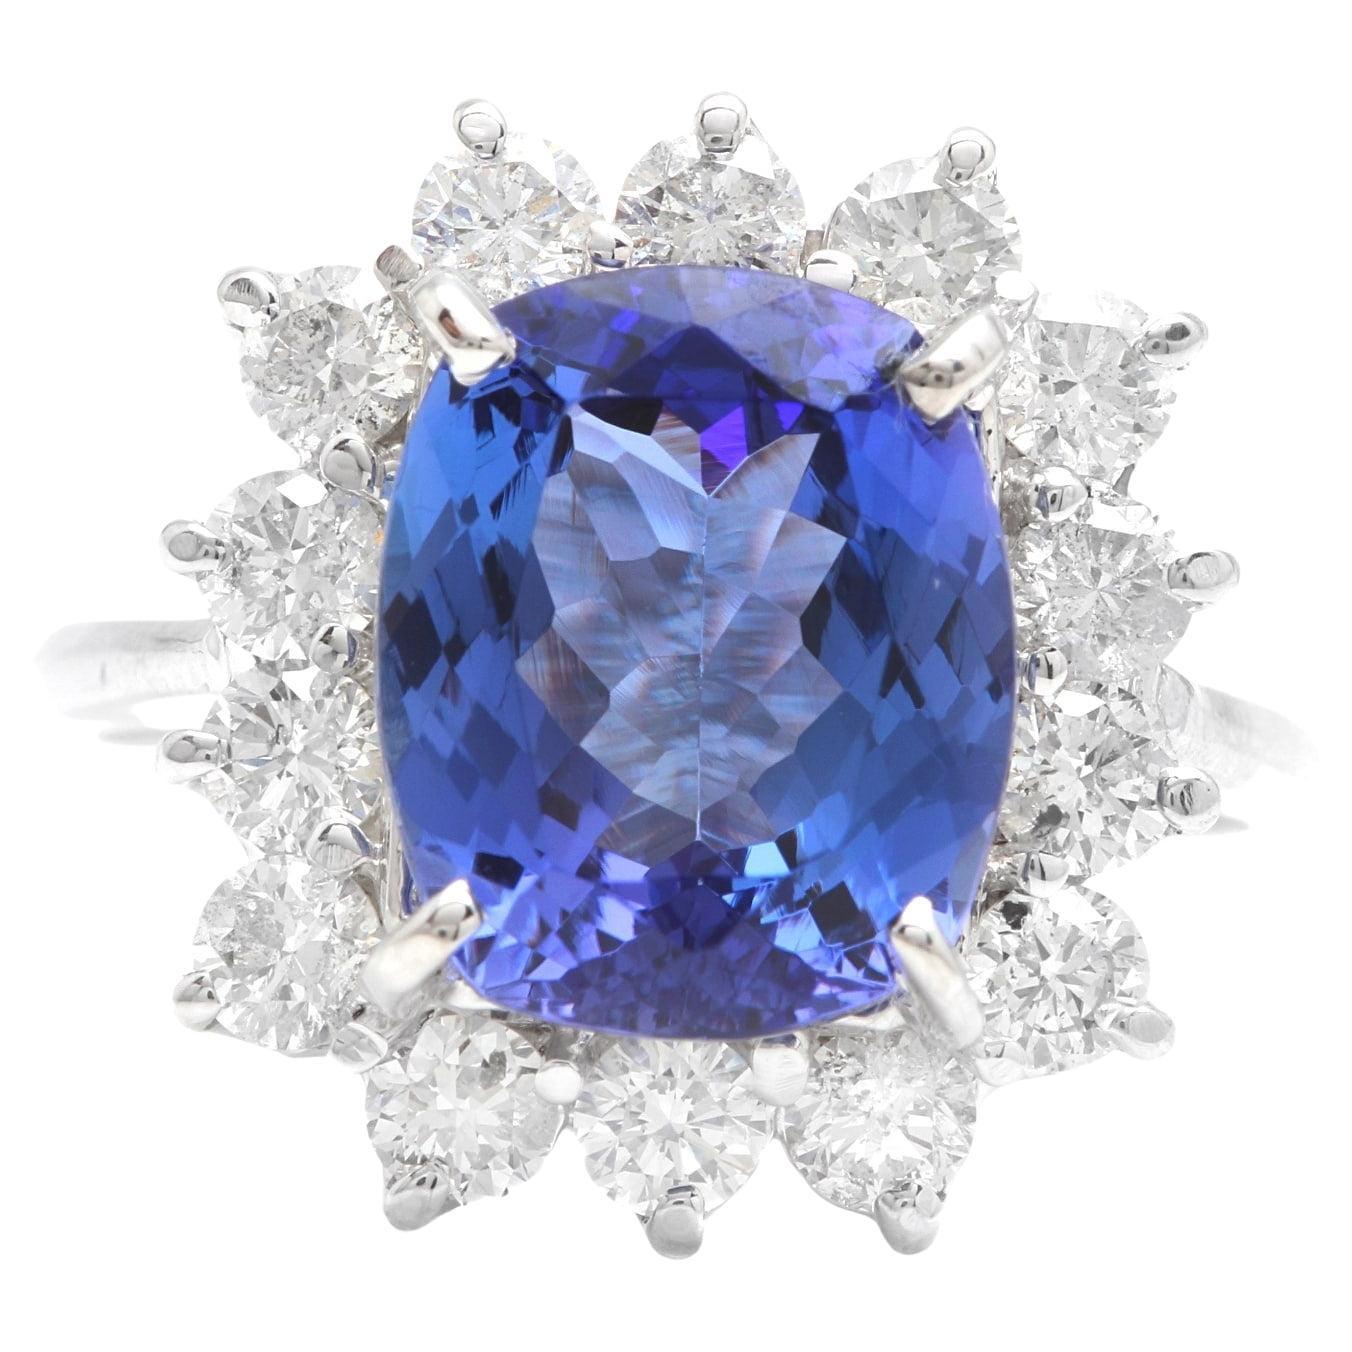 5.60ct Natural Very Nice Looking Tanzanite and Diamond 14K Solid White Gold Ring